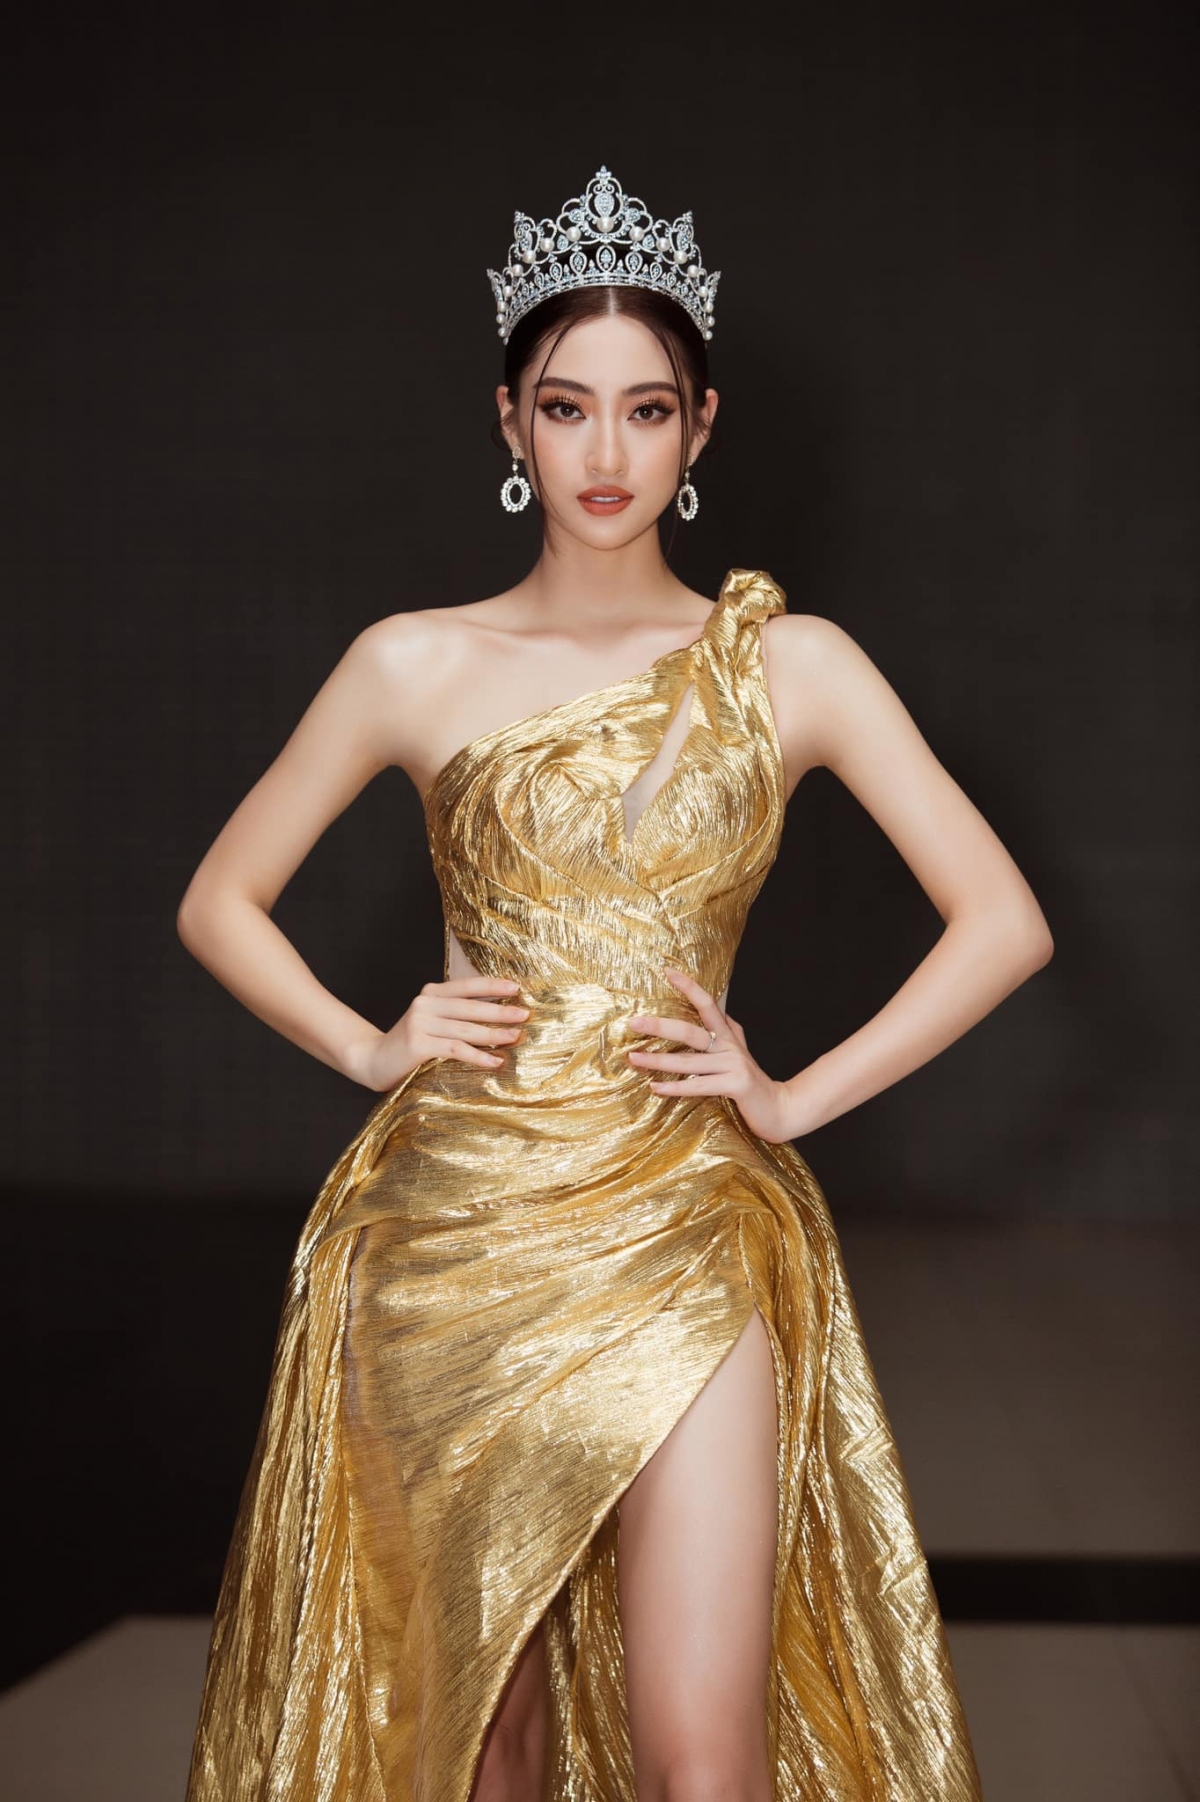 Do my linh, luong thuy linh xuat hien trong clip gioi thieu miss world 2021 hinh anh 3